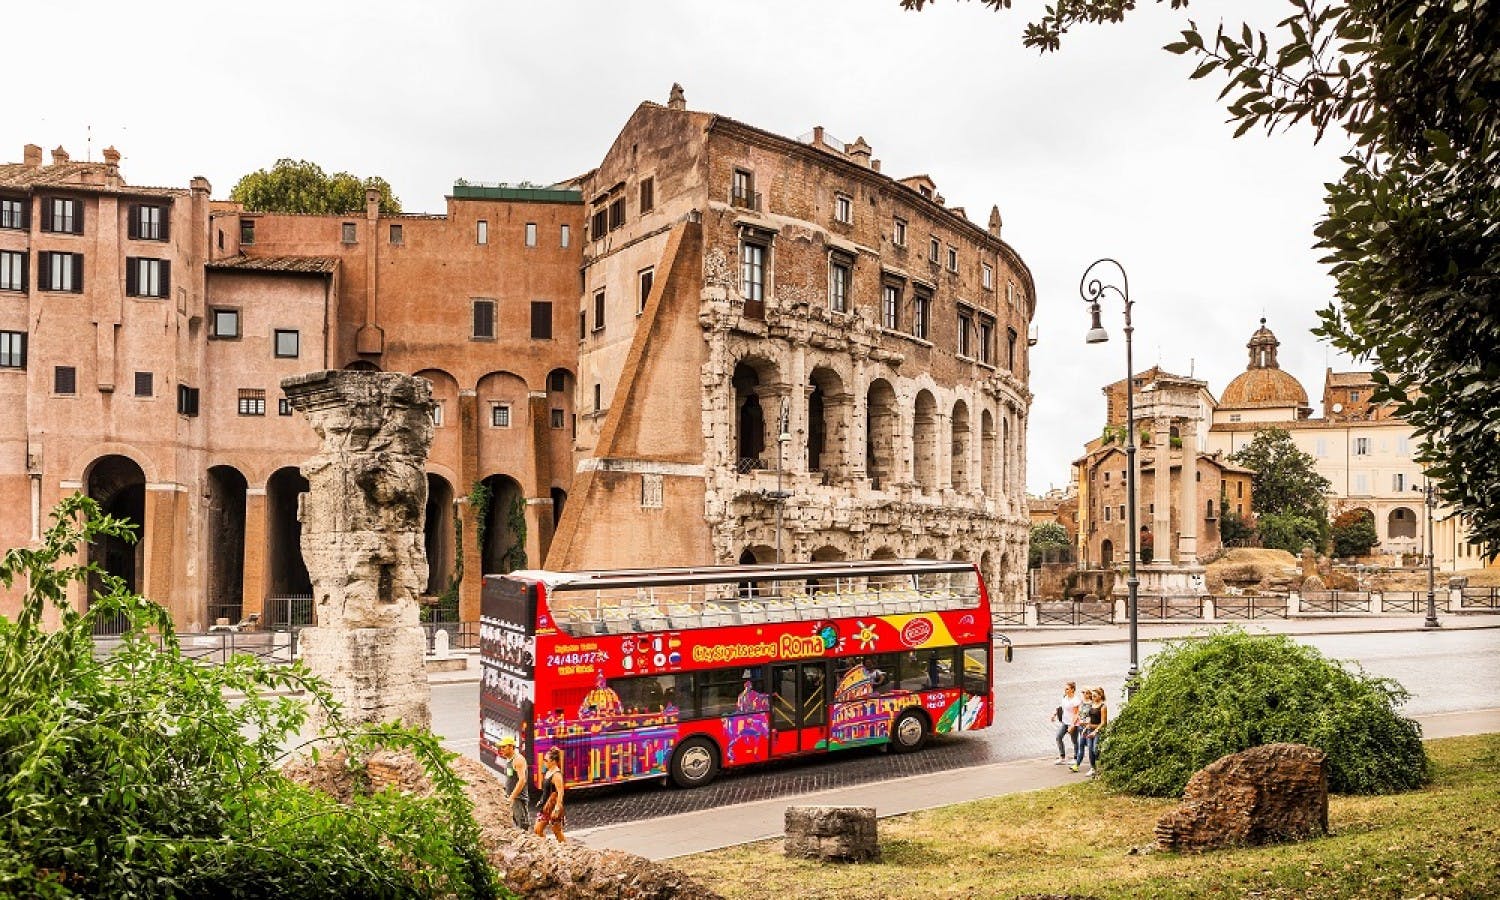 City Sightseeing Rome Hop-on Hop-off Bus Tour 24, 48 or 72-hour Ticket